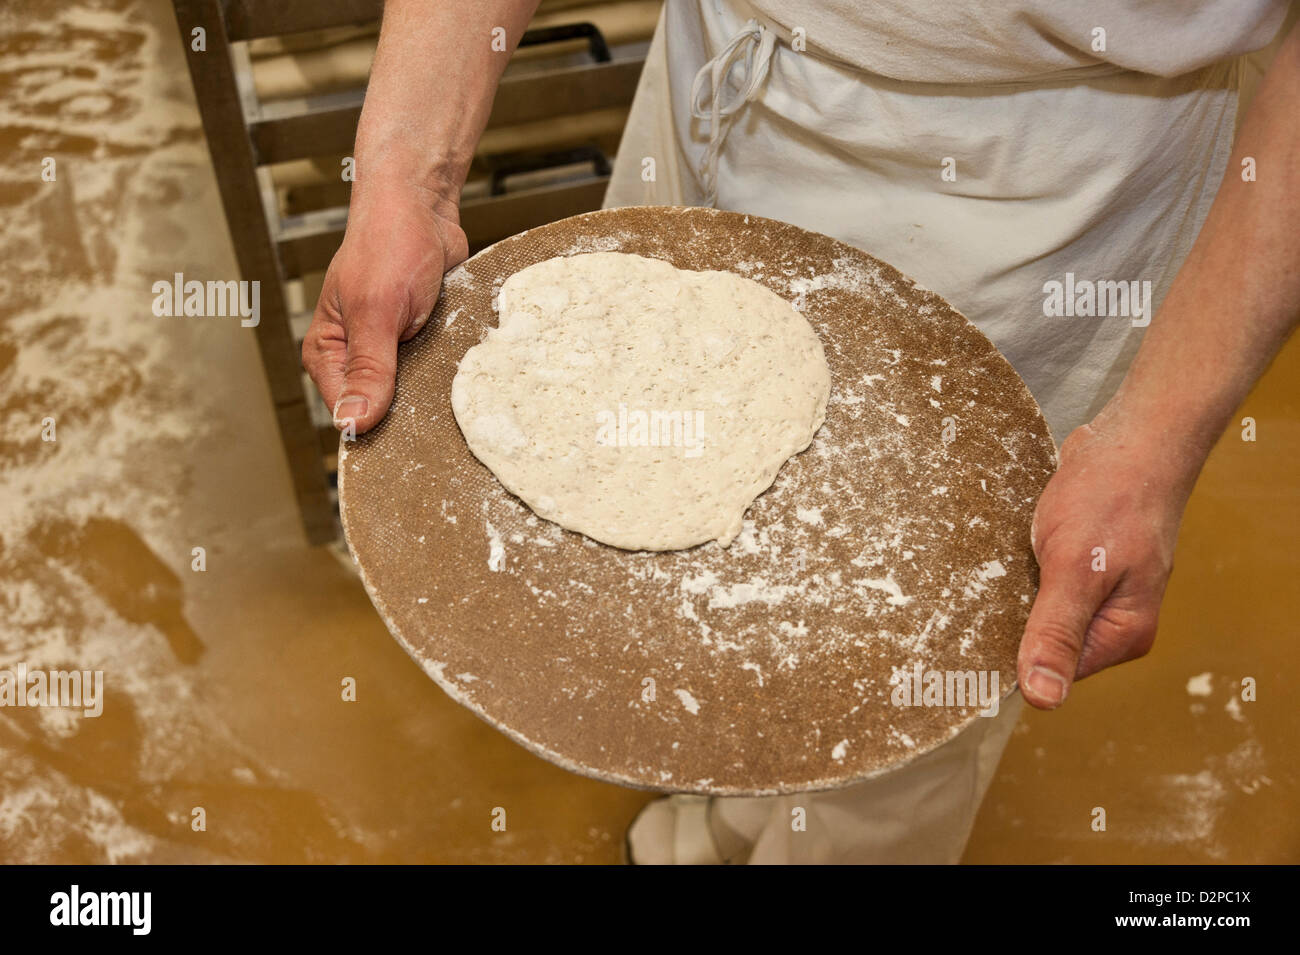 South Tyrol bakery producing traditional bred named Schuettelbrot Stock Photo